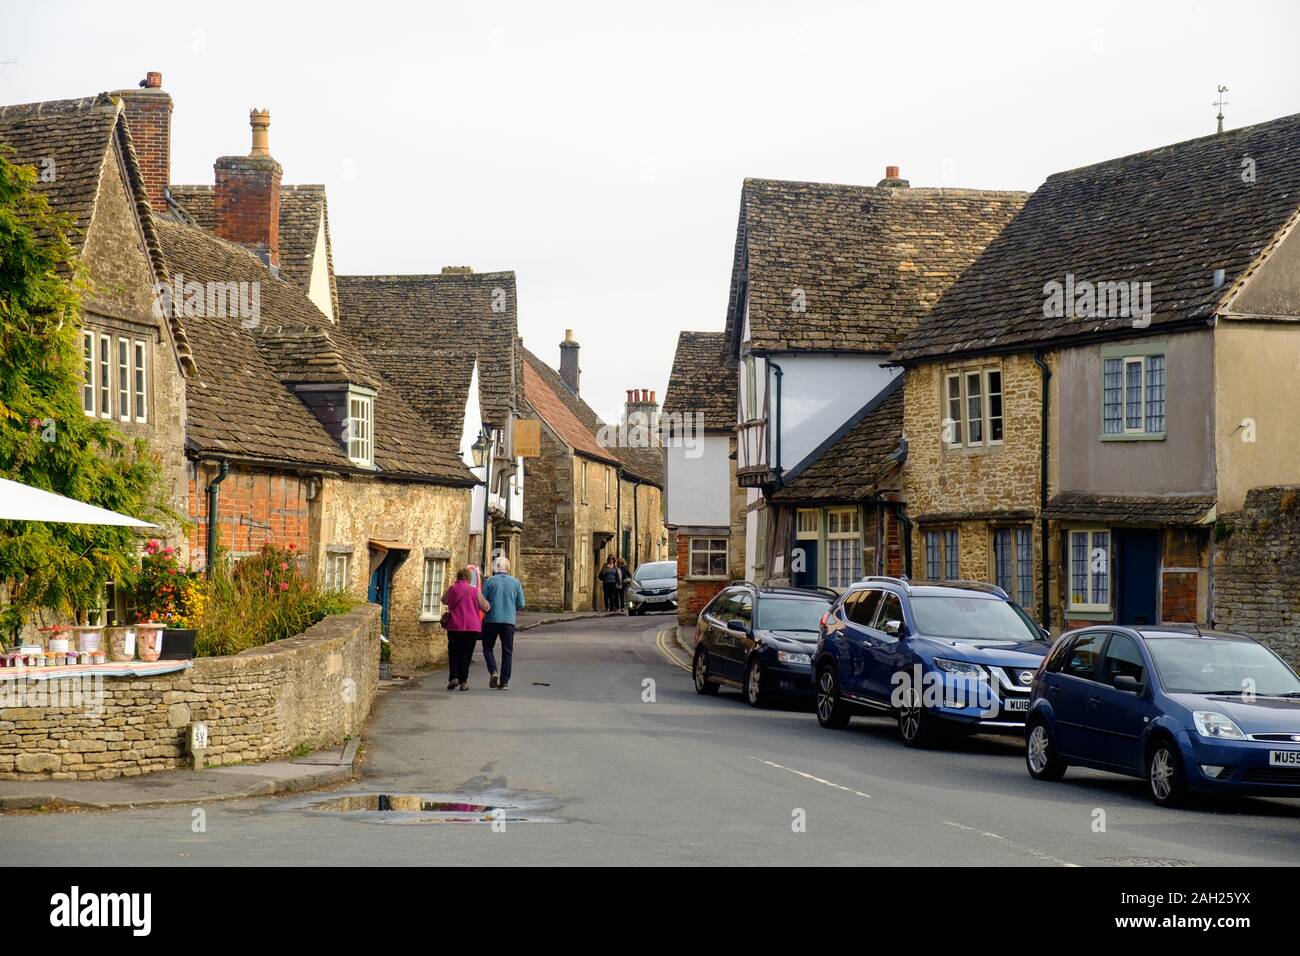 A senior couple walks arm in arm through the streets of Lacock, a small village with traditional houses. This location often serves as a movie set. Stock Photo